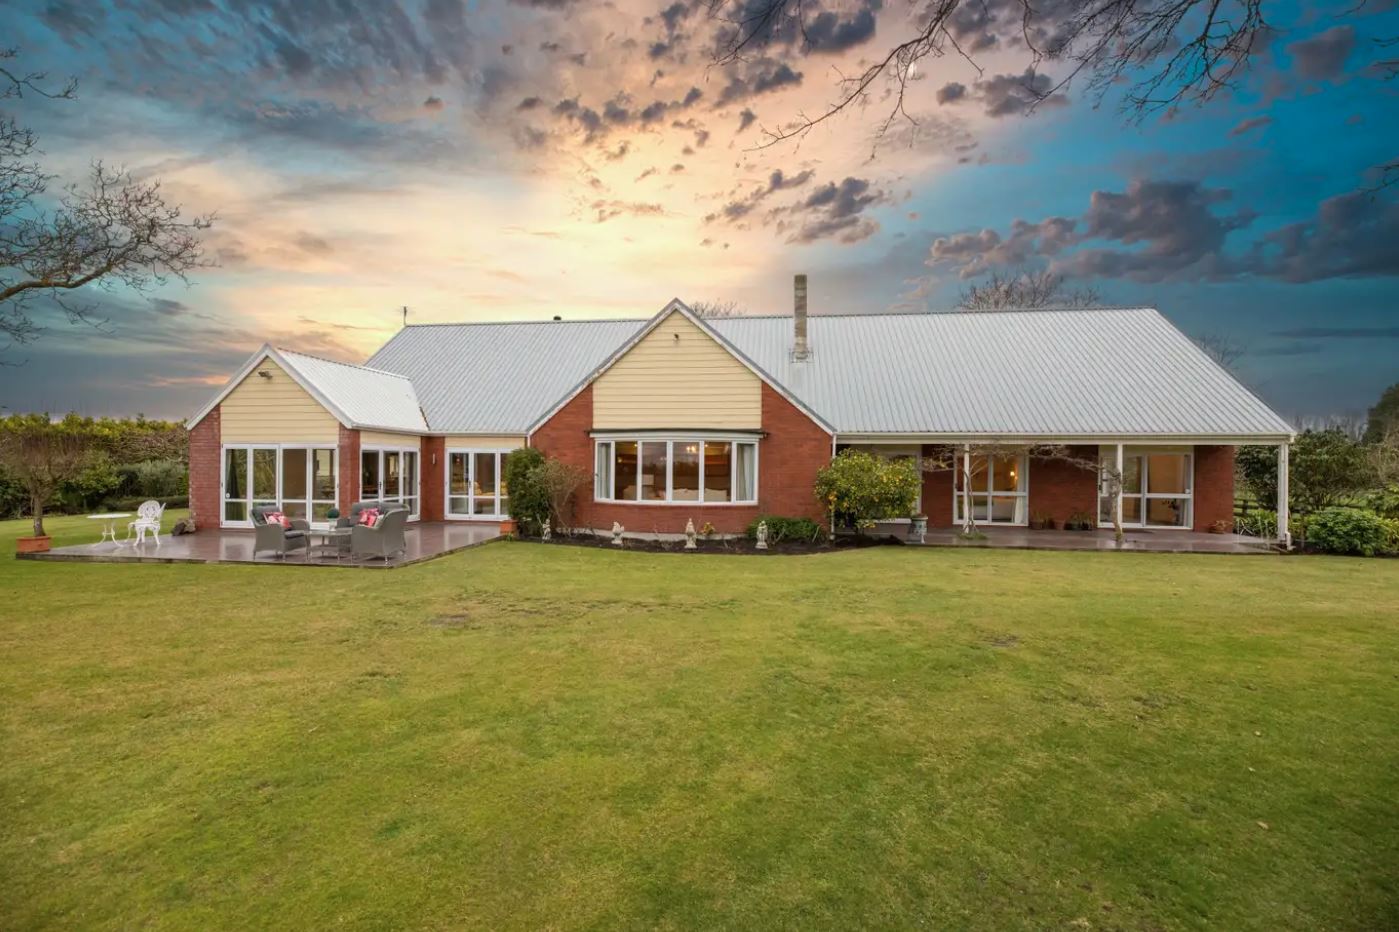 This property at 130 Styx Mill Rd, Casebrook, sold at auction for $2.85 million. Photo: Supplied